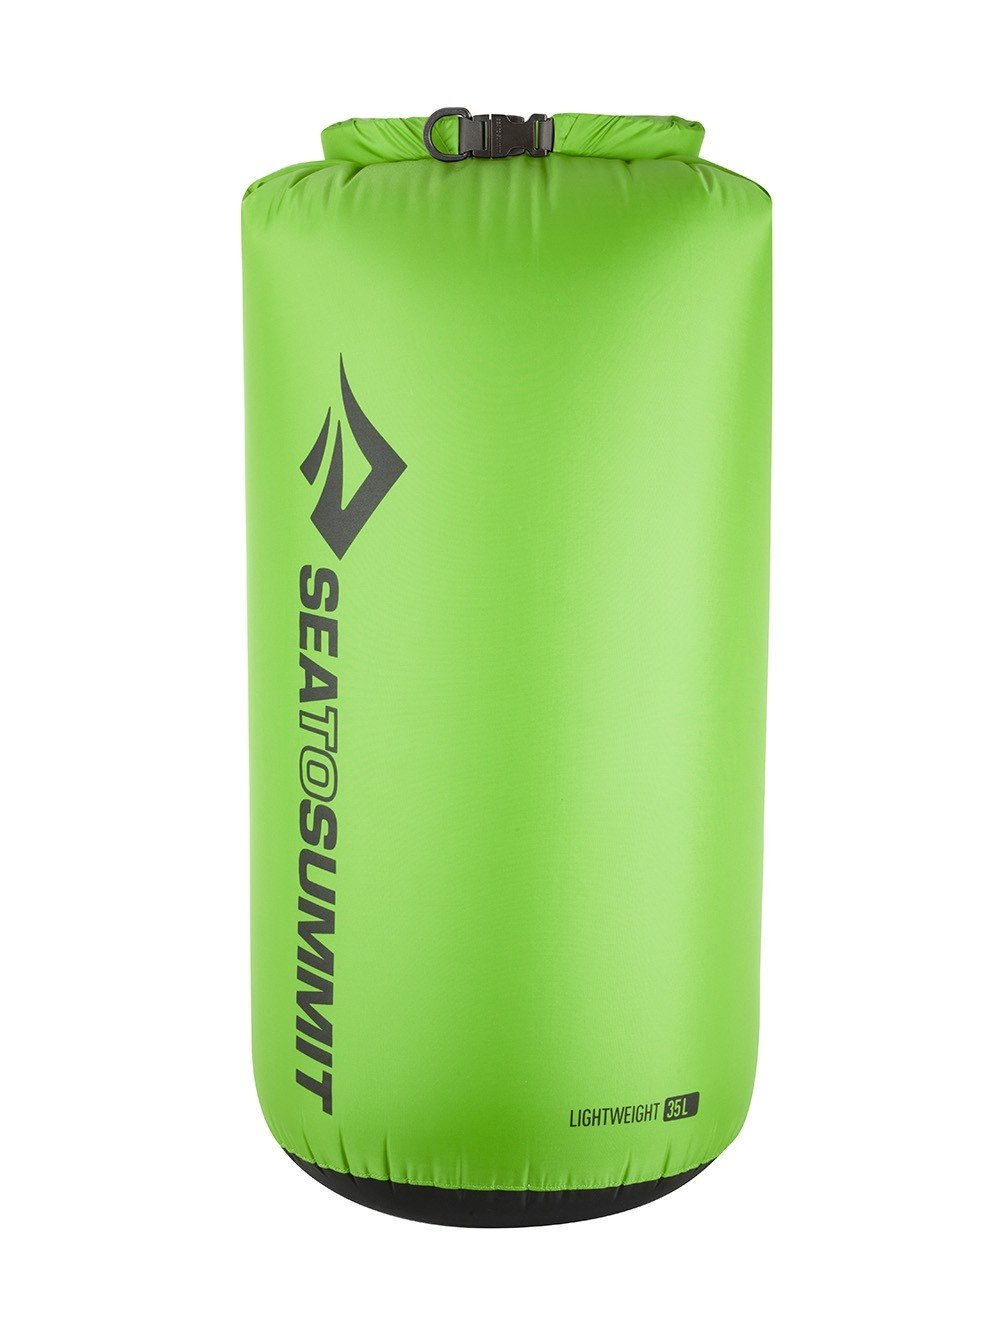 Sea To Summit Lightweight 70D 35 Litres Dry Sack Bags, Packs and Cases Sea To Summit Green Tactical Gear Supplier Tactical Distributors Australia